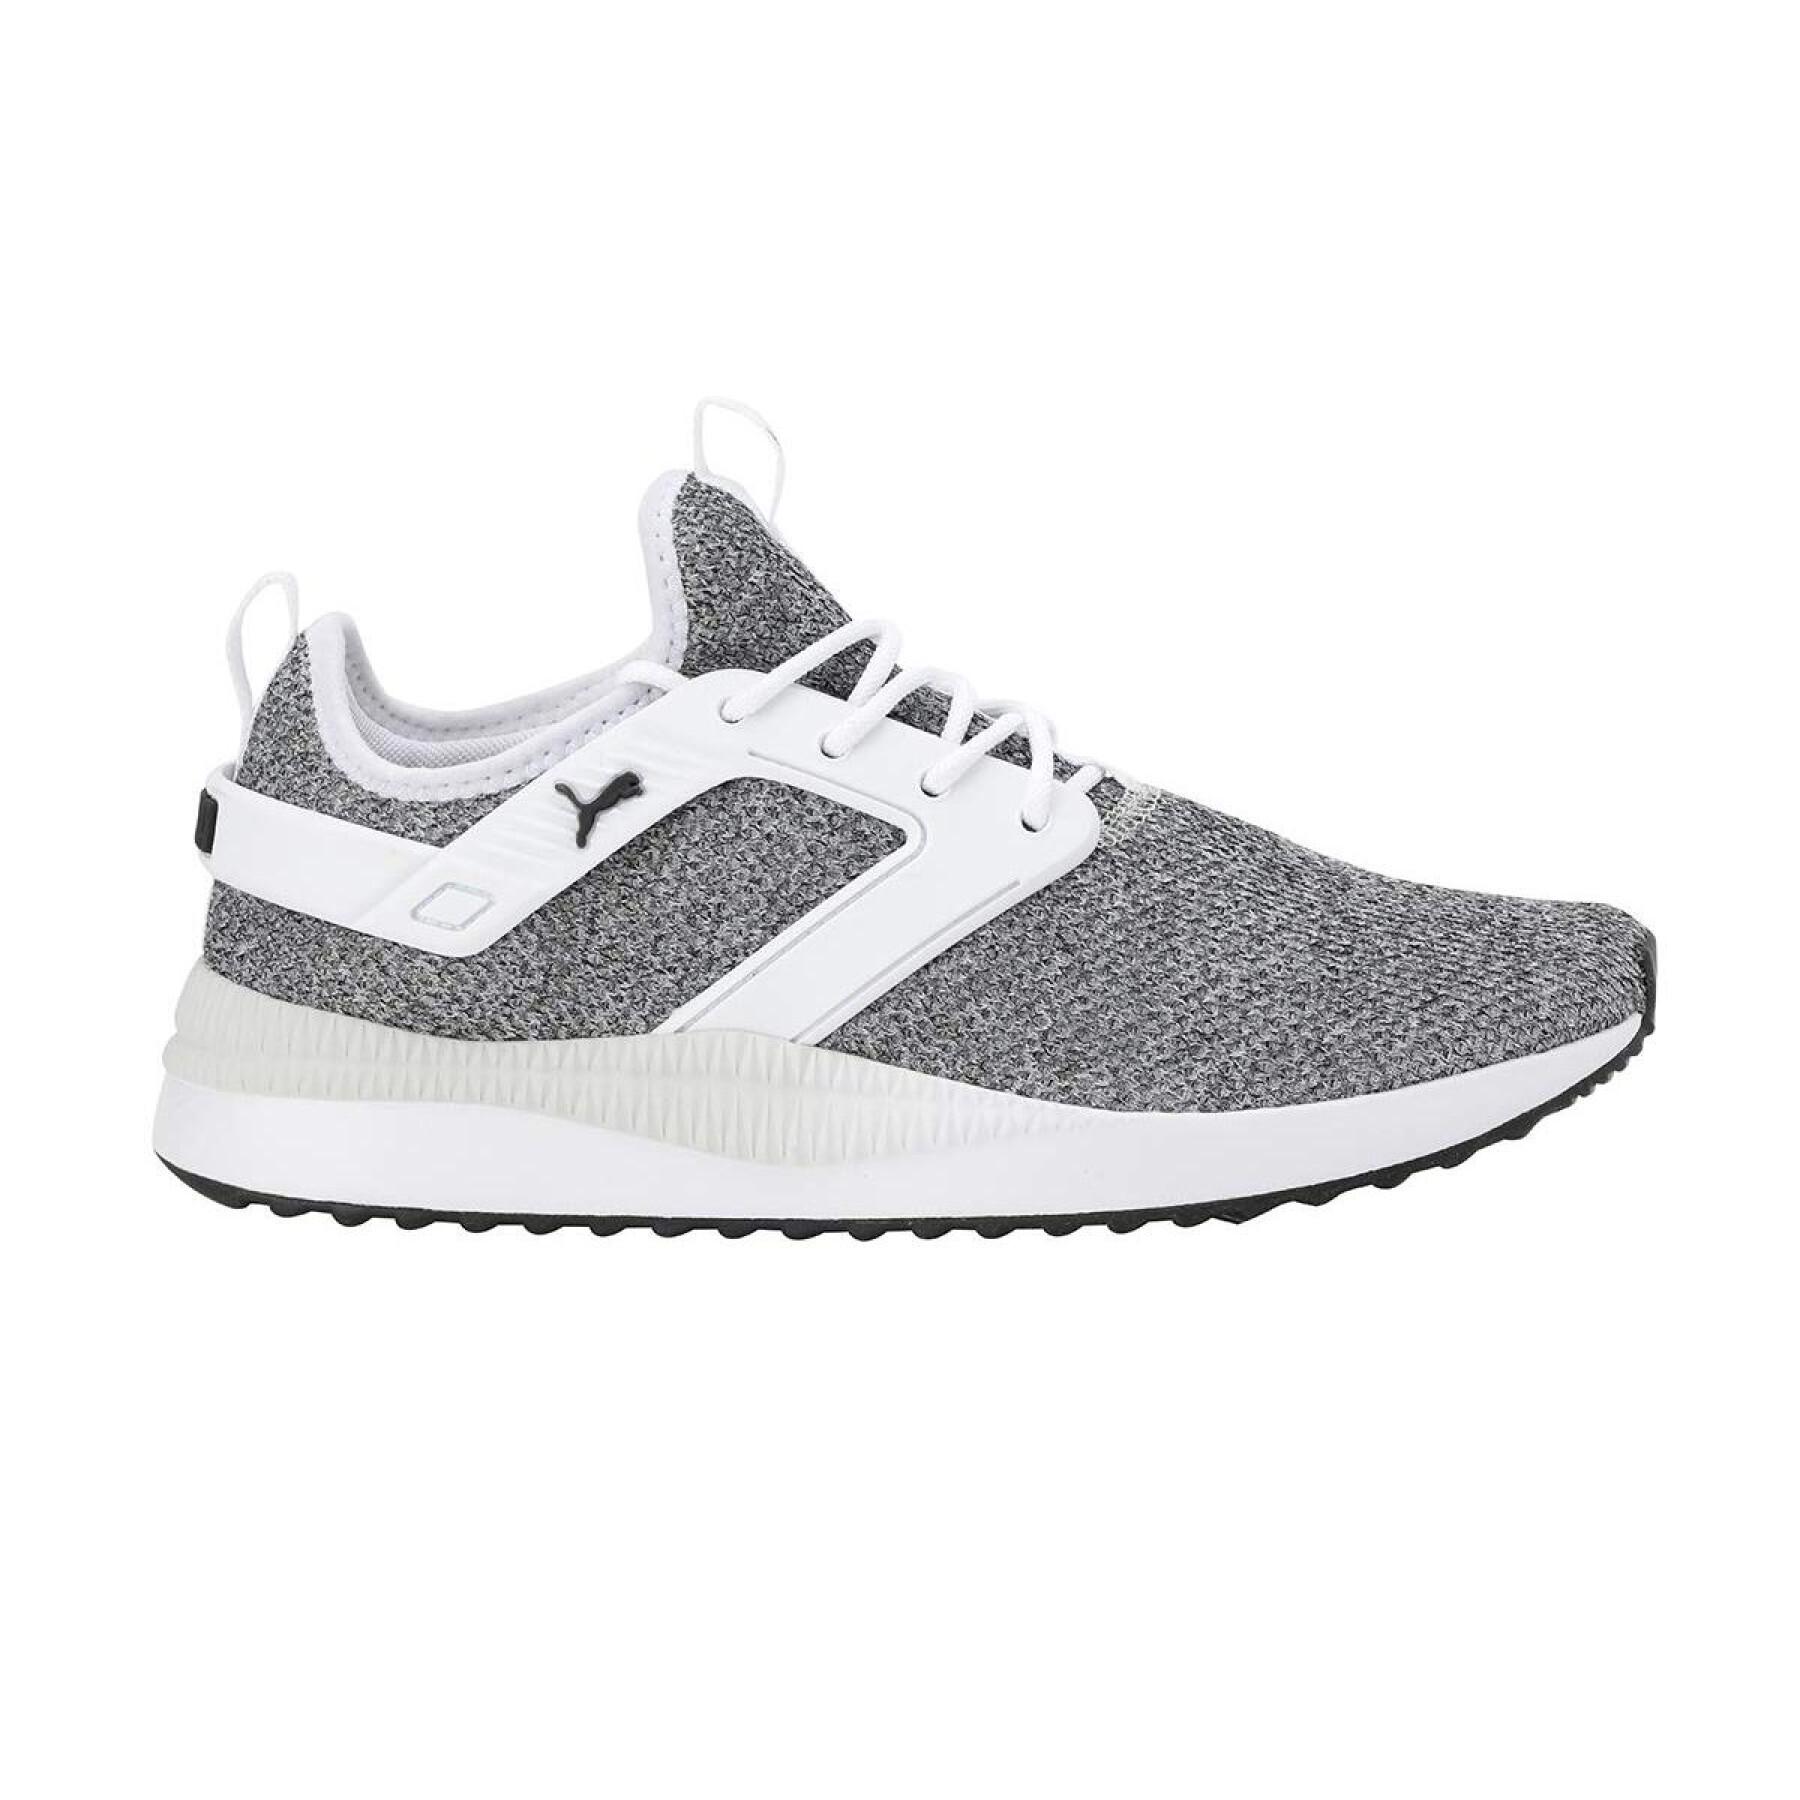 Shoes Puma Pacer next excel vknit